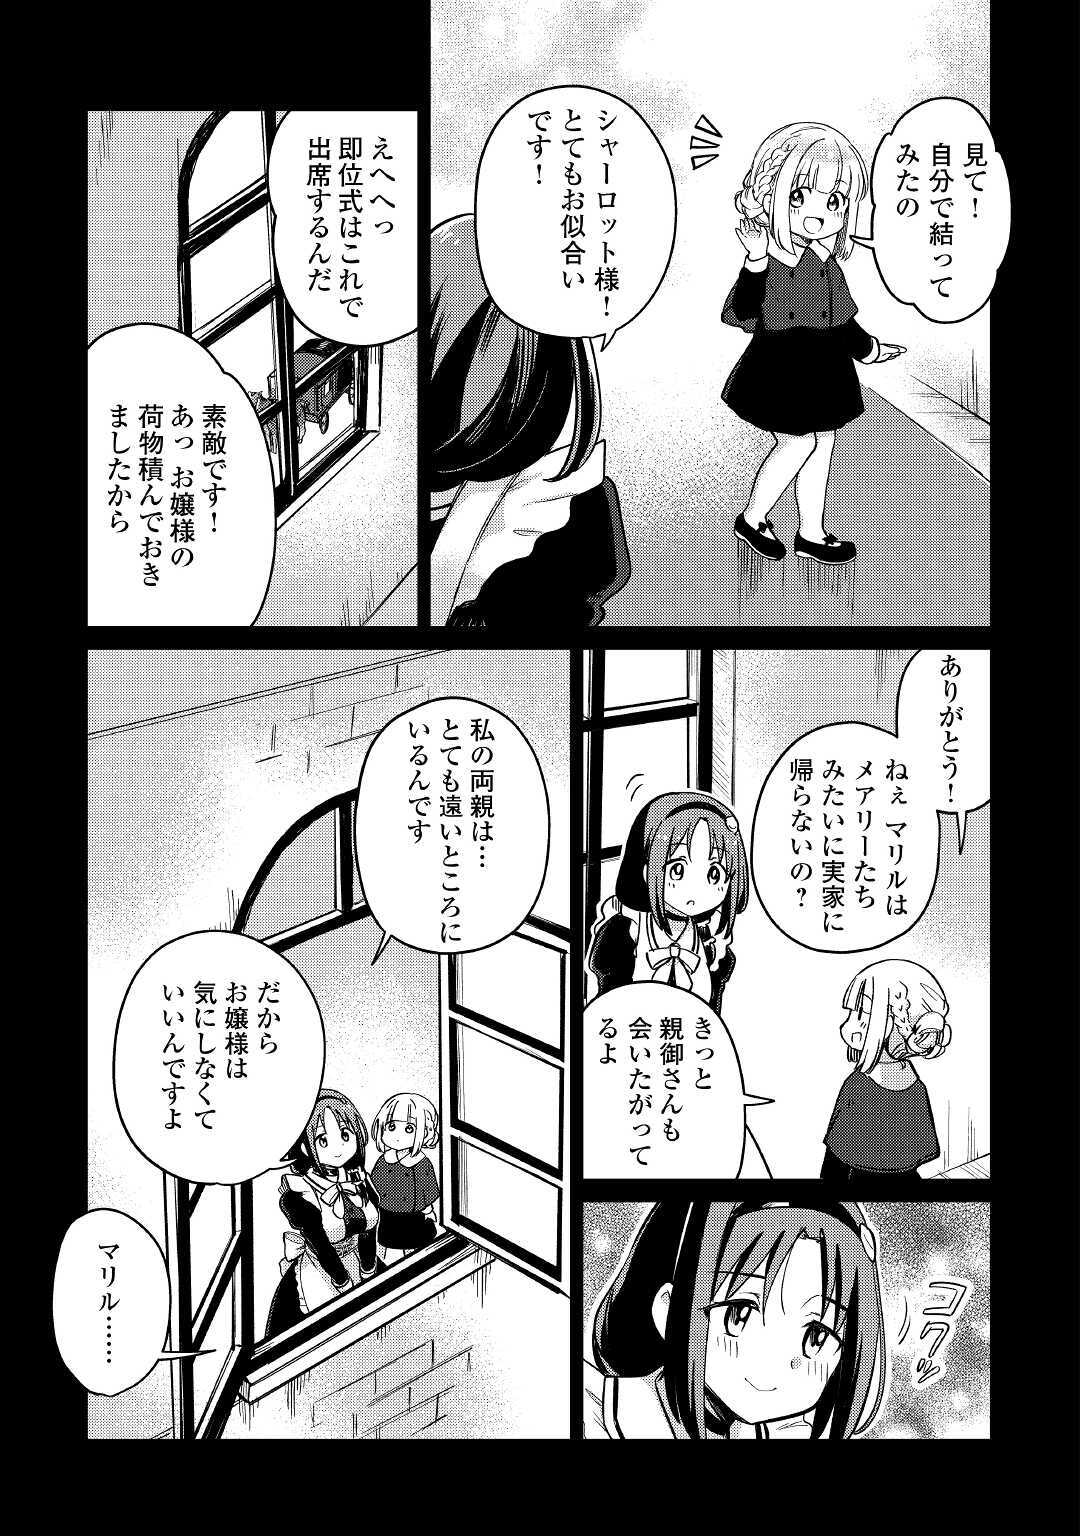 The Former Structural Researcher’s Story of Otherworldly Adventure 第33話 - Page 3